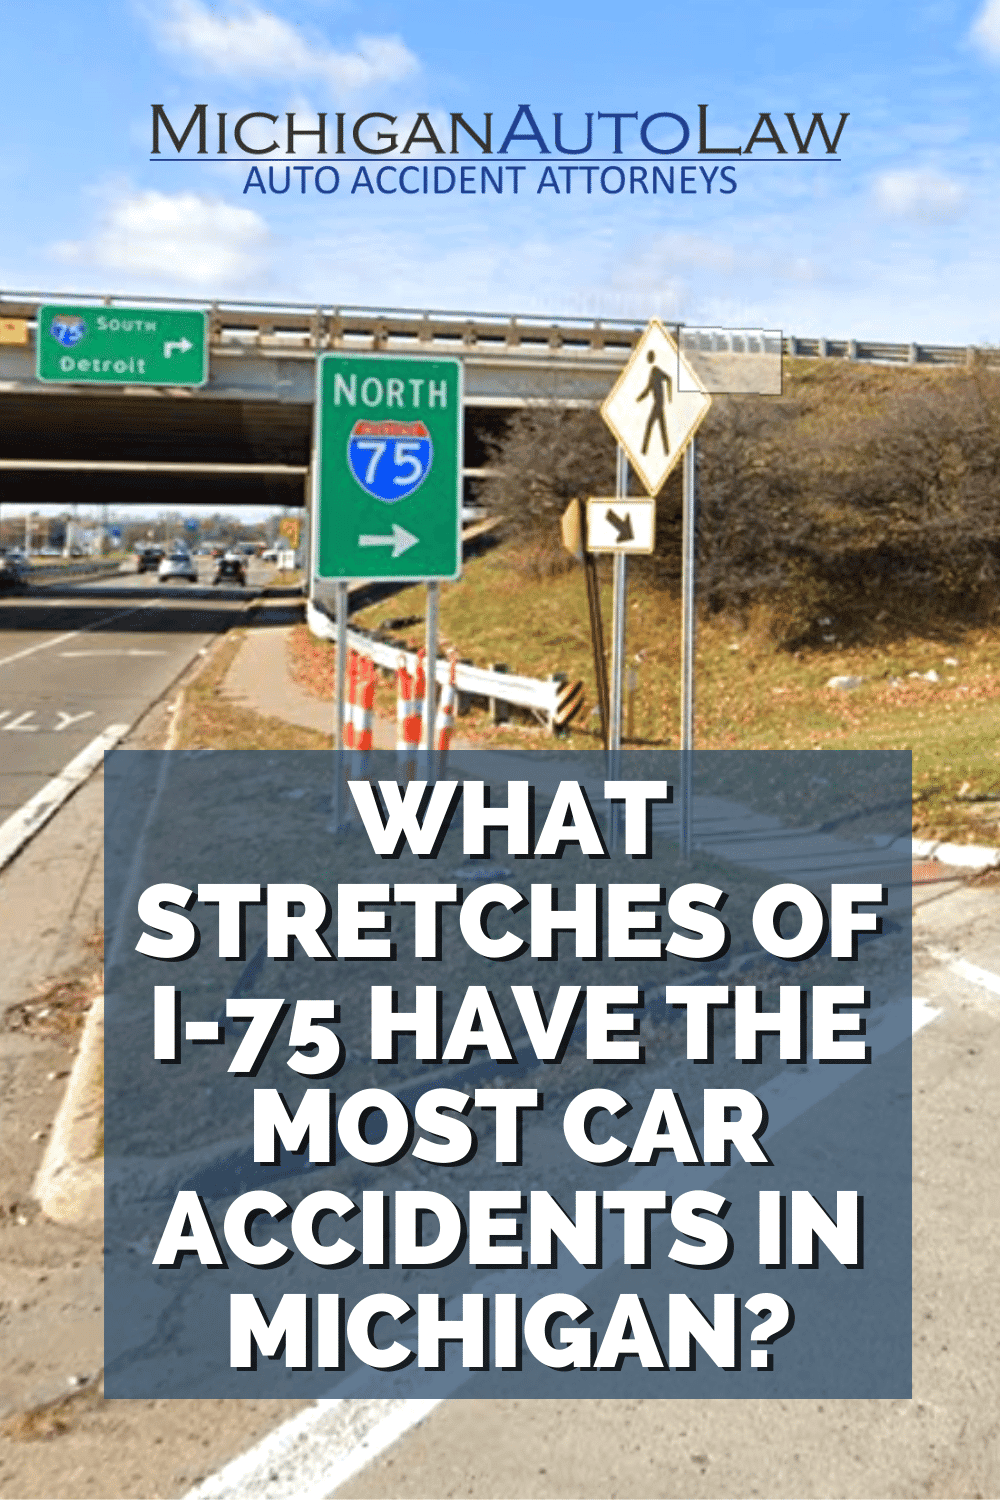 I-75 Car Accidents In Michigan: What Stretches Are The Most Dangerous?